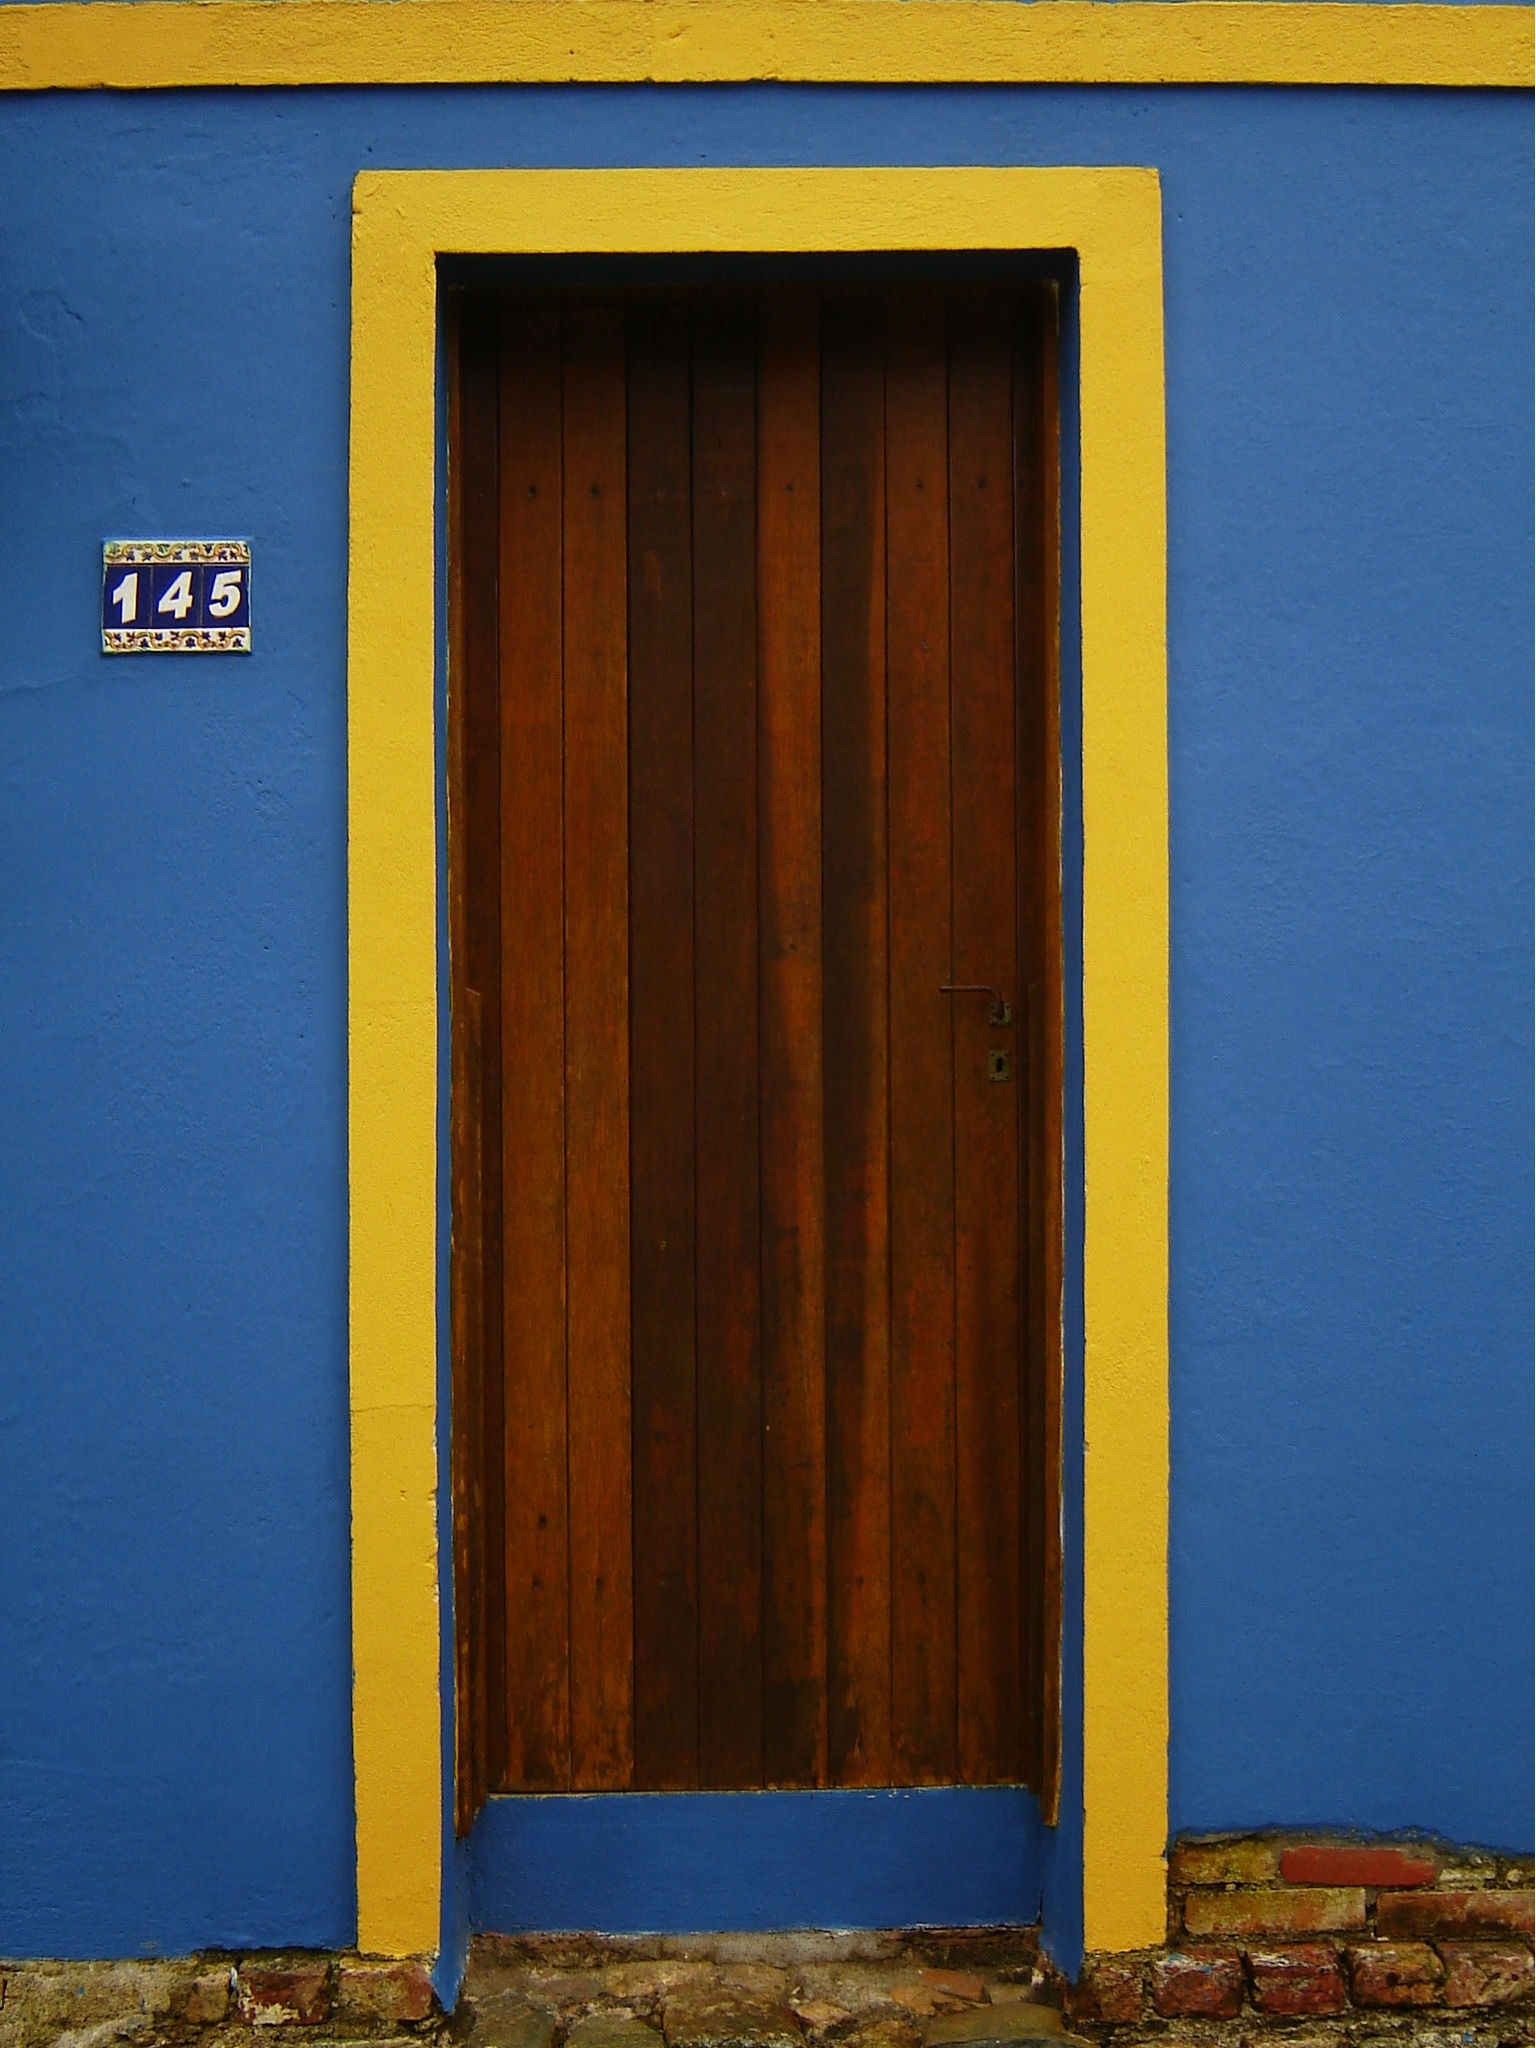 blue and yellow facade with brown wooden door